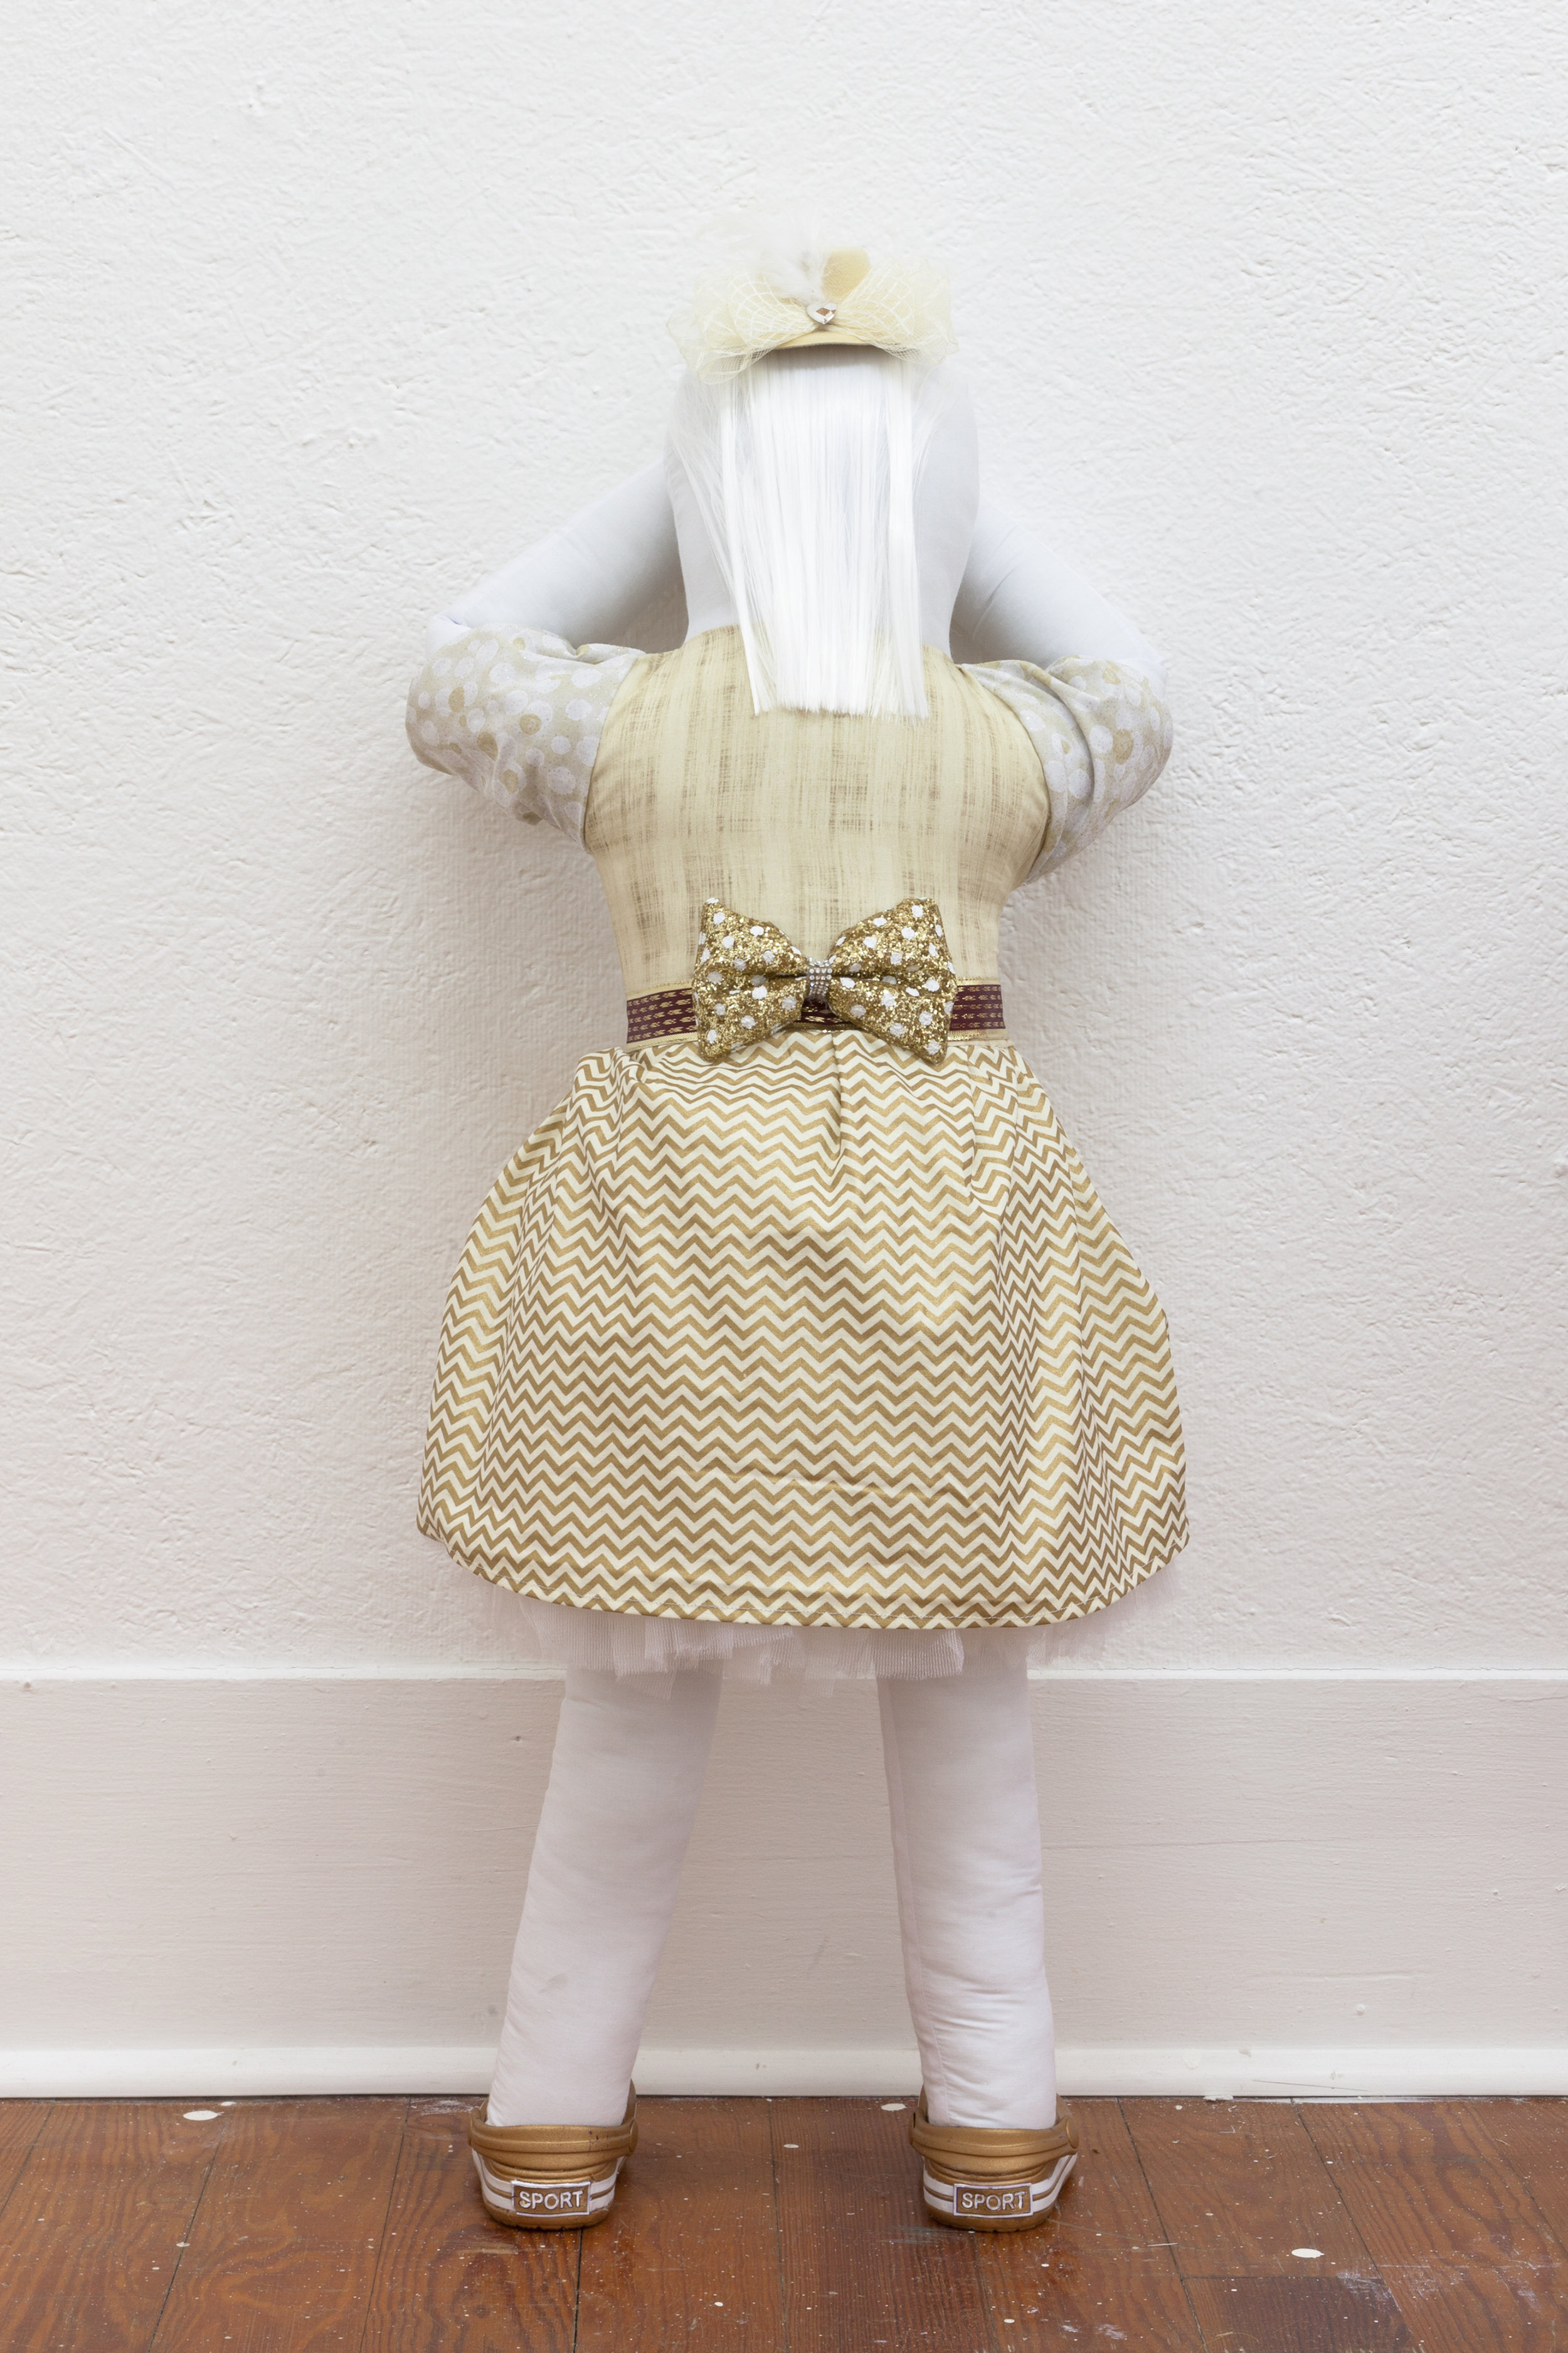  Abby Lloyd, Mary, 2019. Fabric, Poly-Fil, ribbon, hair extensions, found materials Approximately 36 x 14 inches 